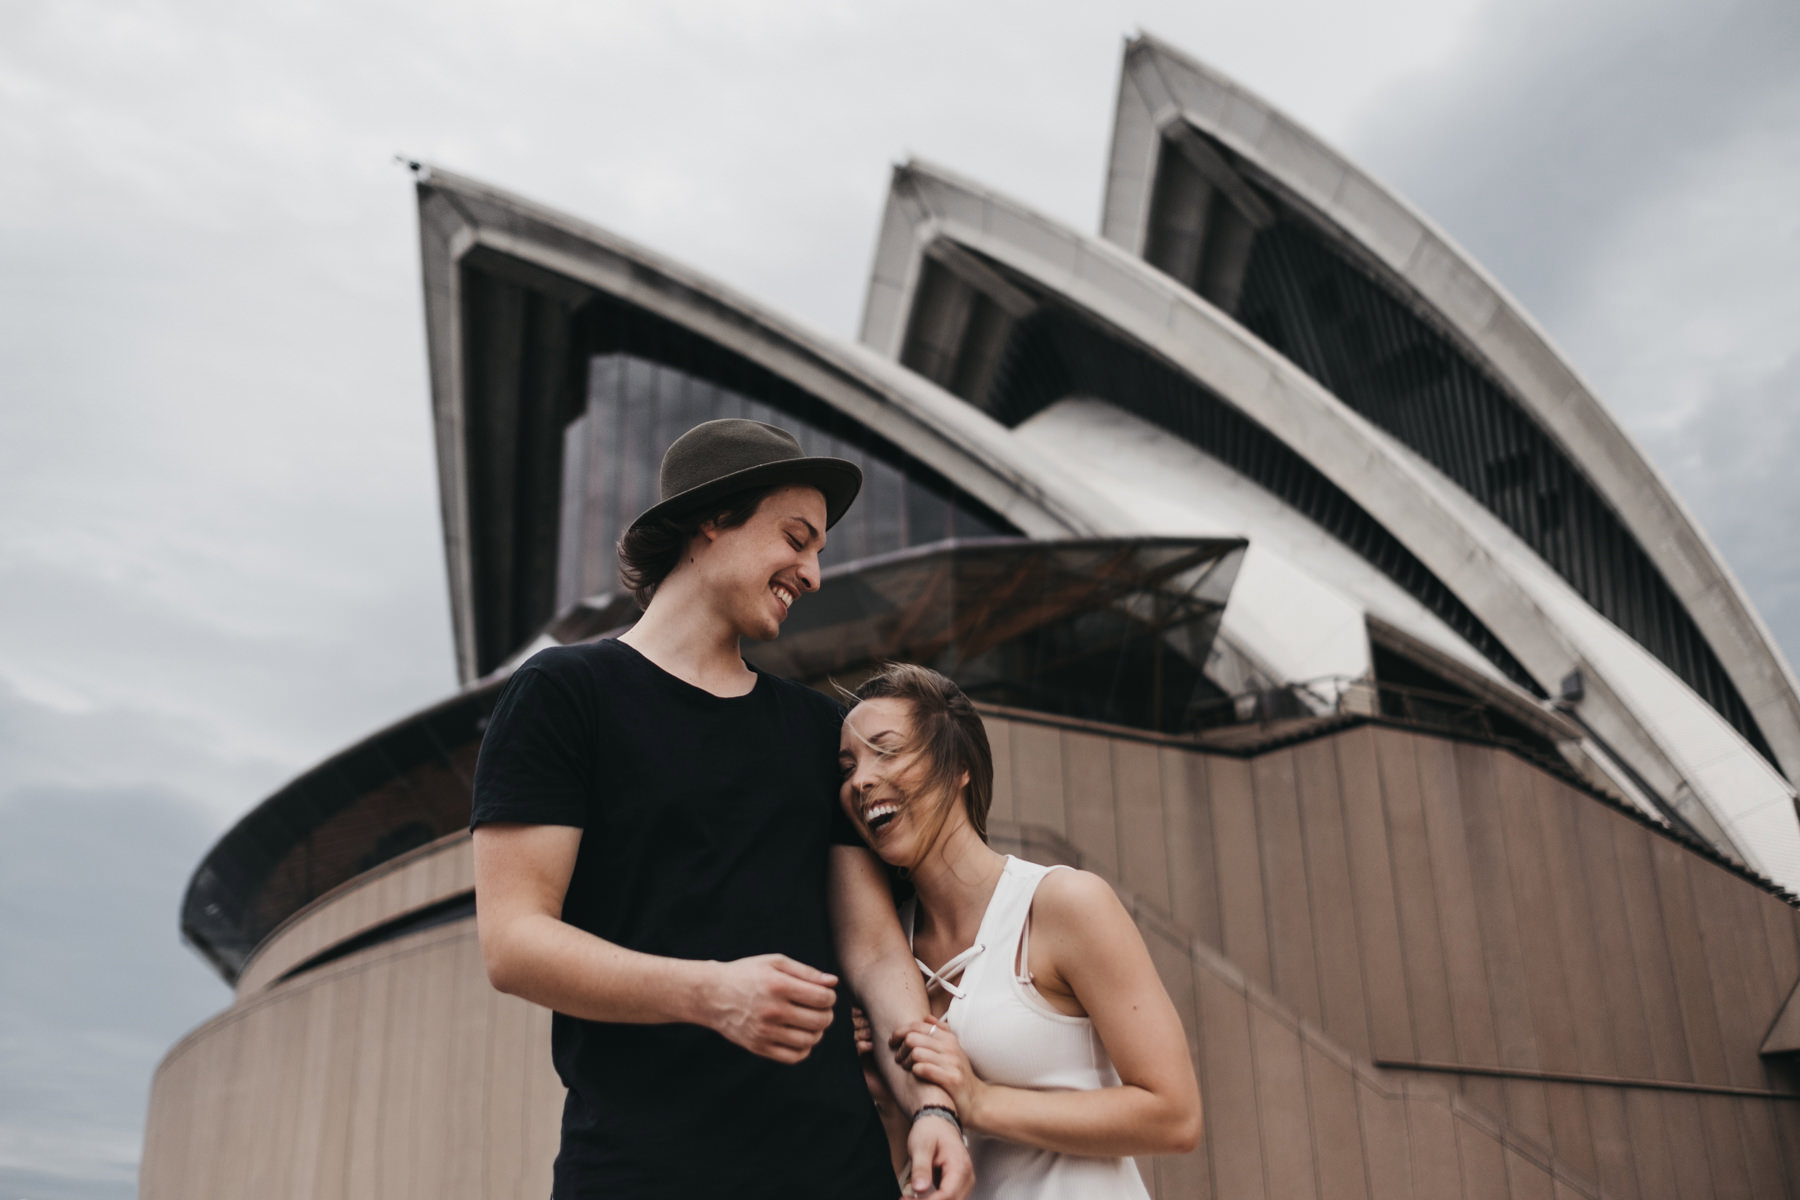 travelling australia as a couple